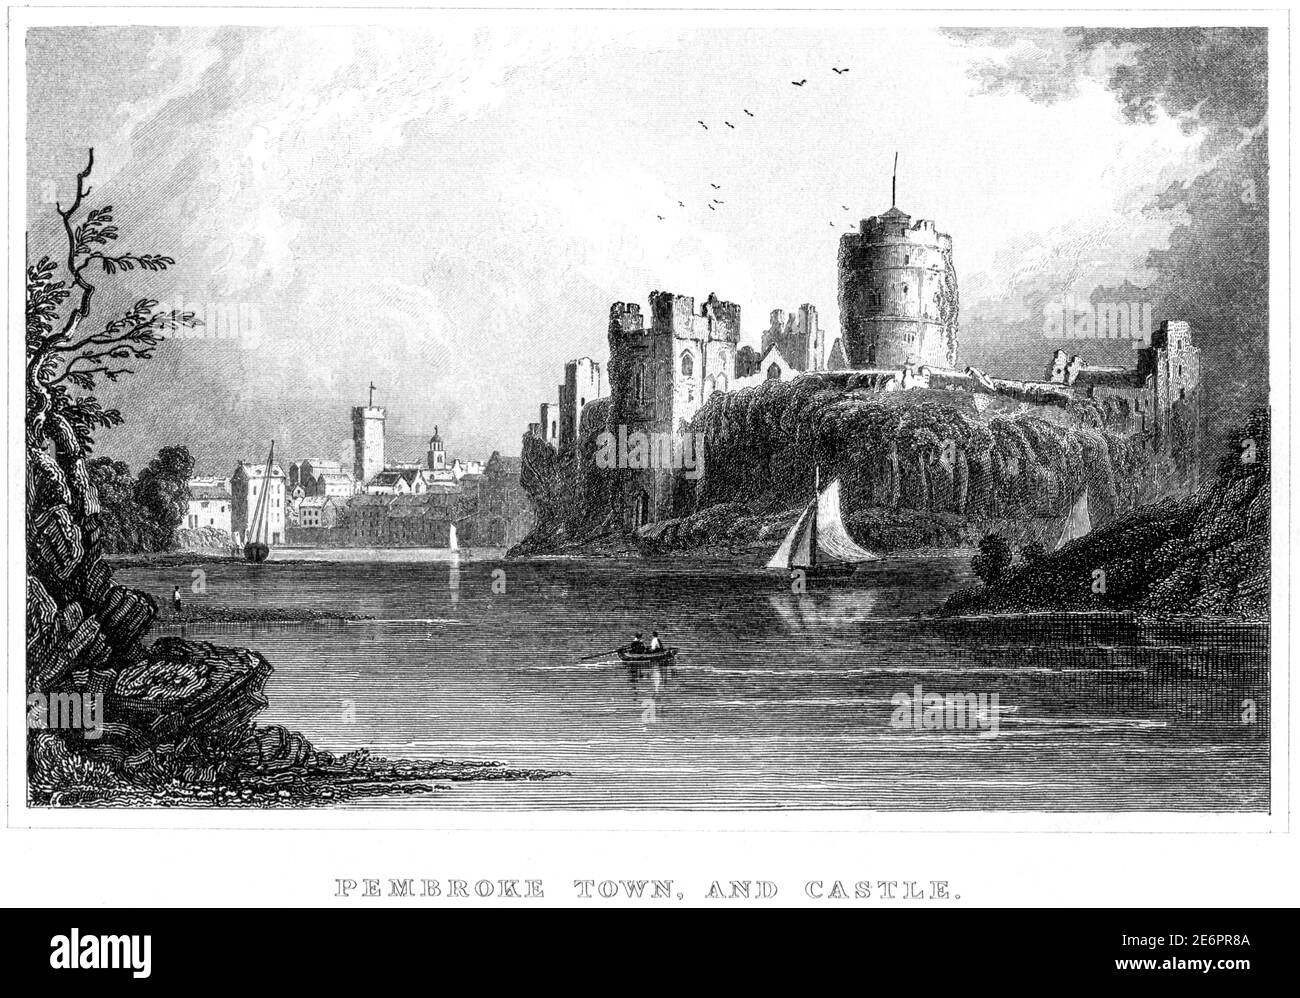 An engraving of Pembroke Town and Castle scanned at high resolution from a book published in 1854.  Believed copyright free. Stock Photo